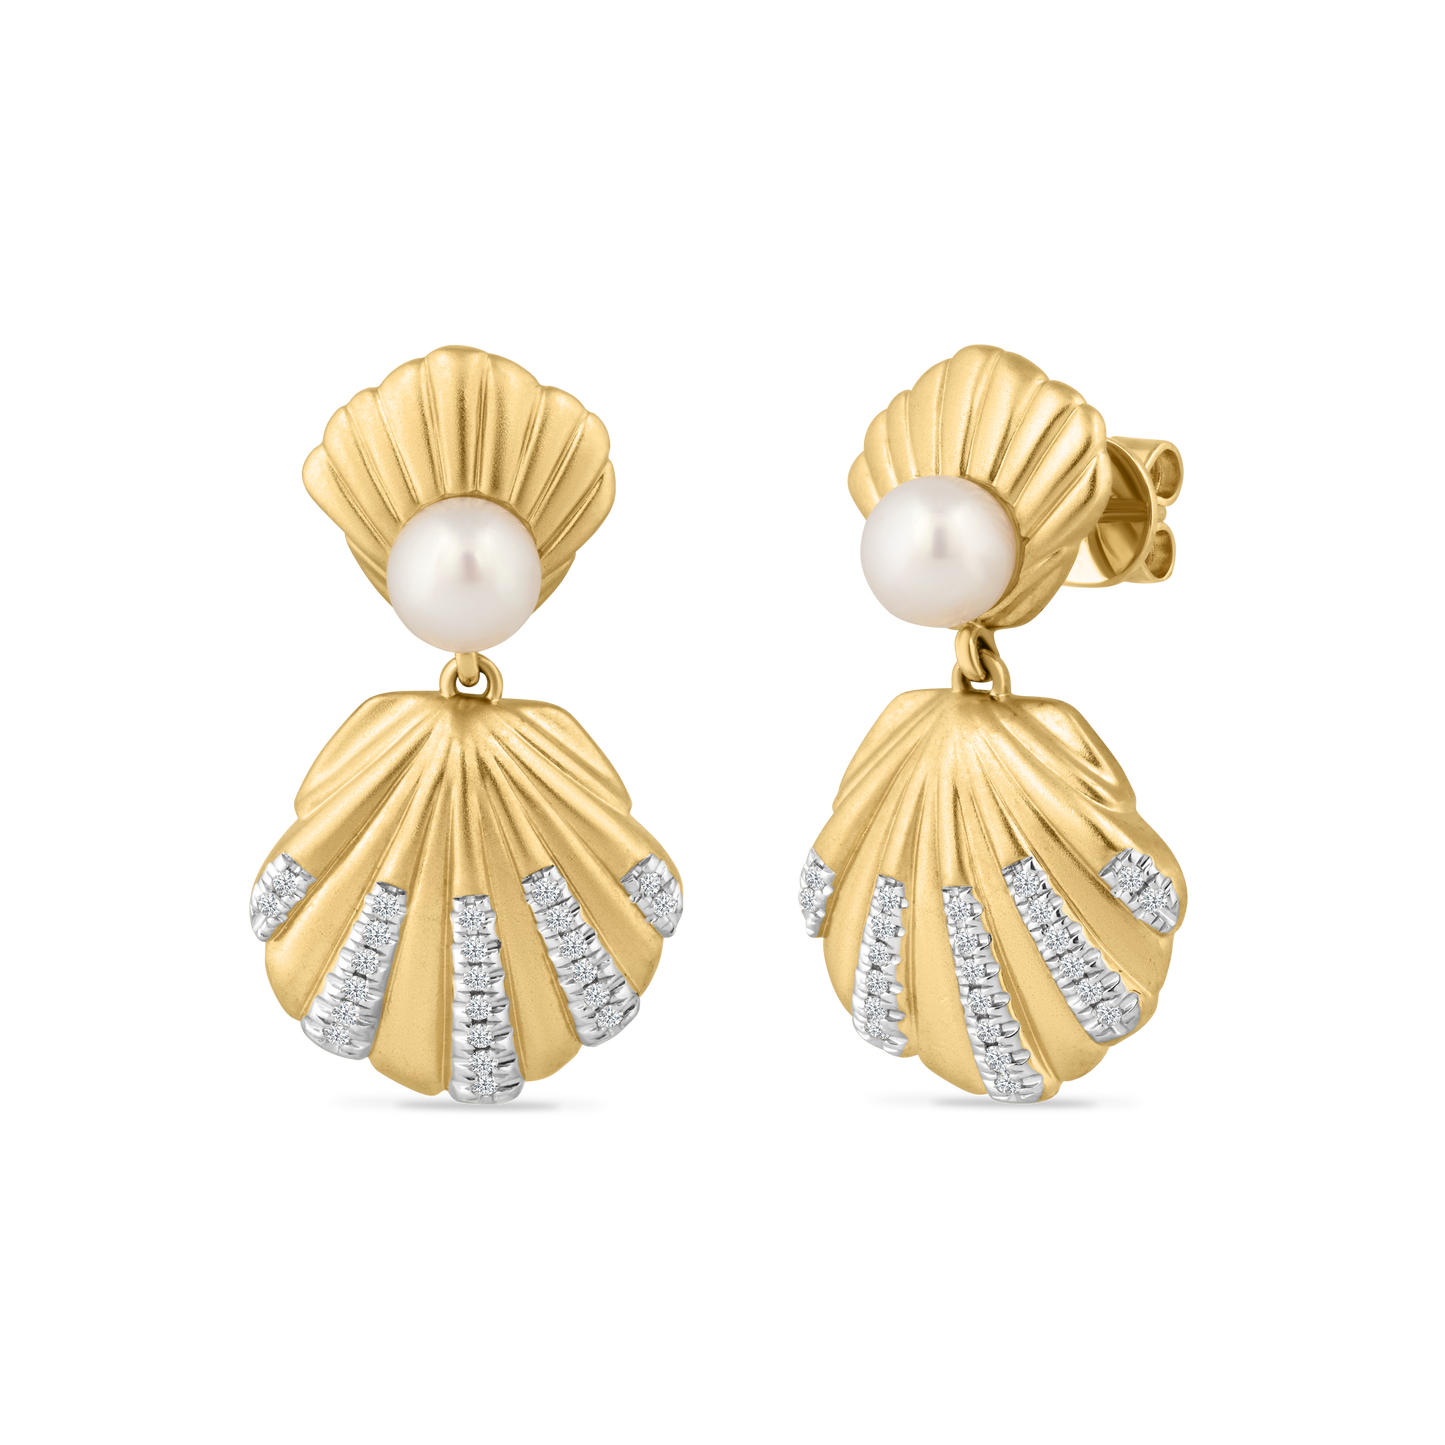 14K SHELL EARRINGS WITH 25 DIAMONDS 0.16CT & PEARLS